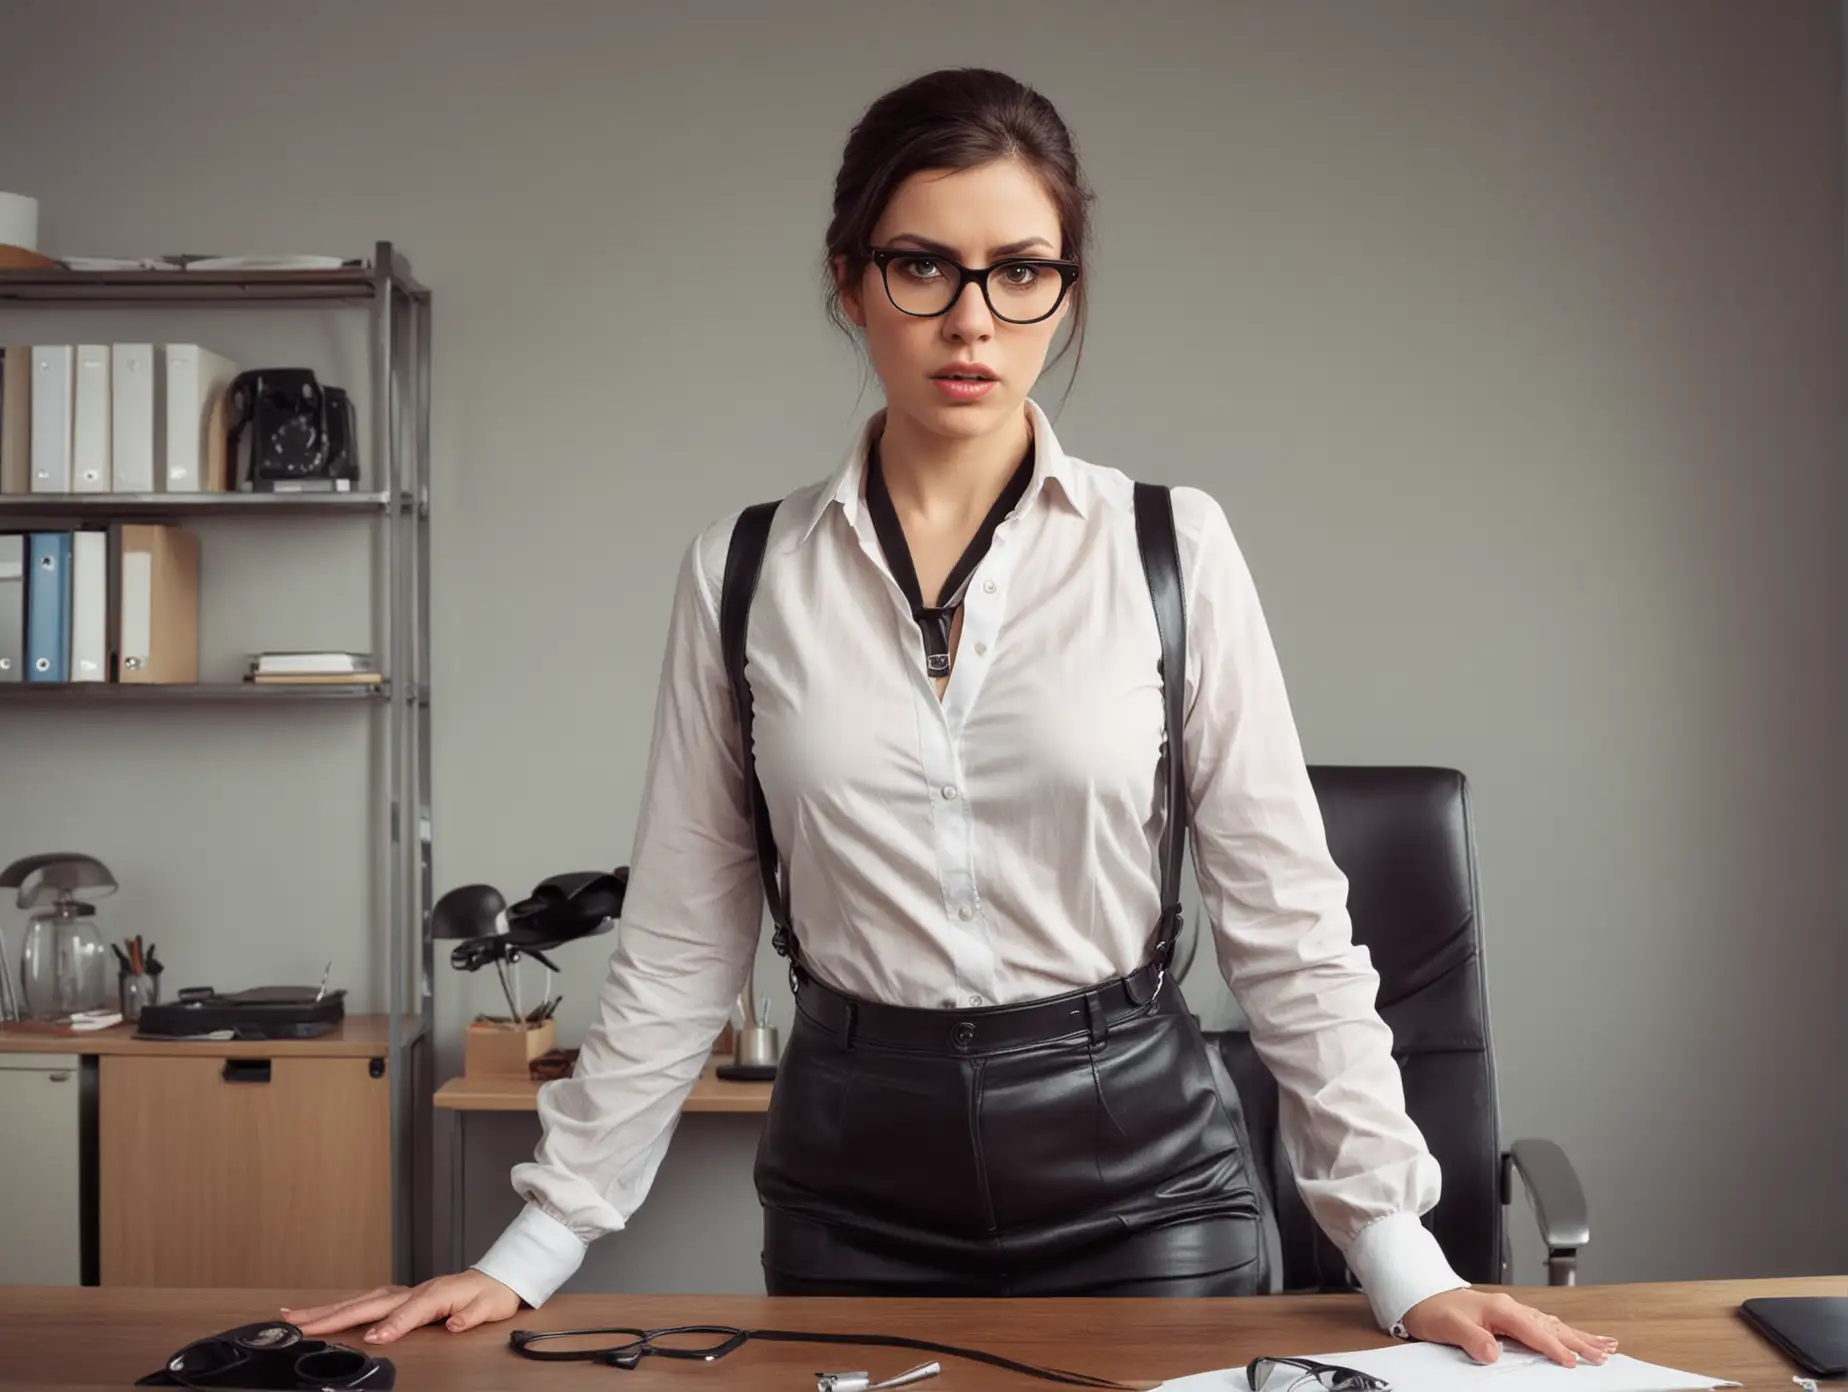 A Business woman is standing in front of her desk in her modern office. She is staring at me with an extremely stern look on her face. She is about 35 and is wearing glasses. She is holding a leather spanking strap.